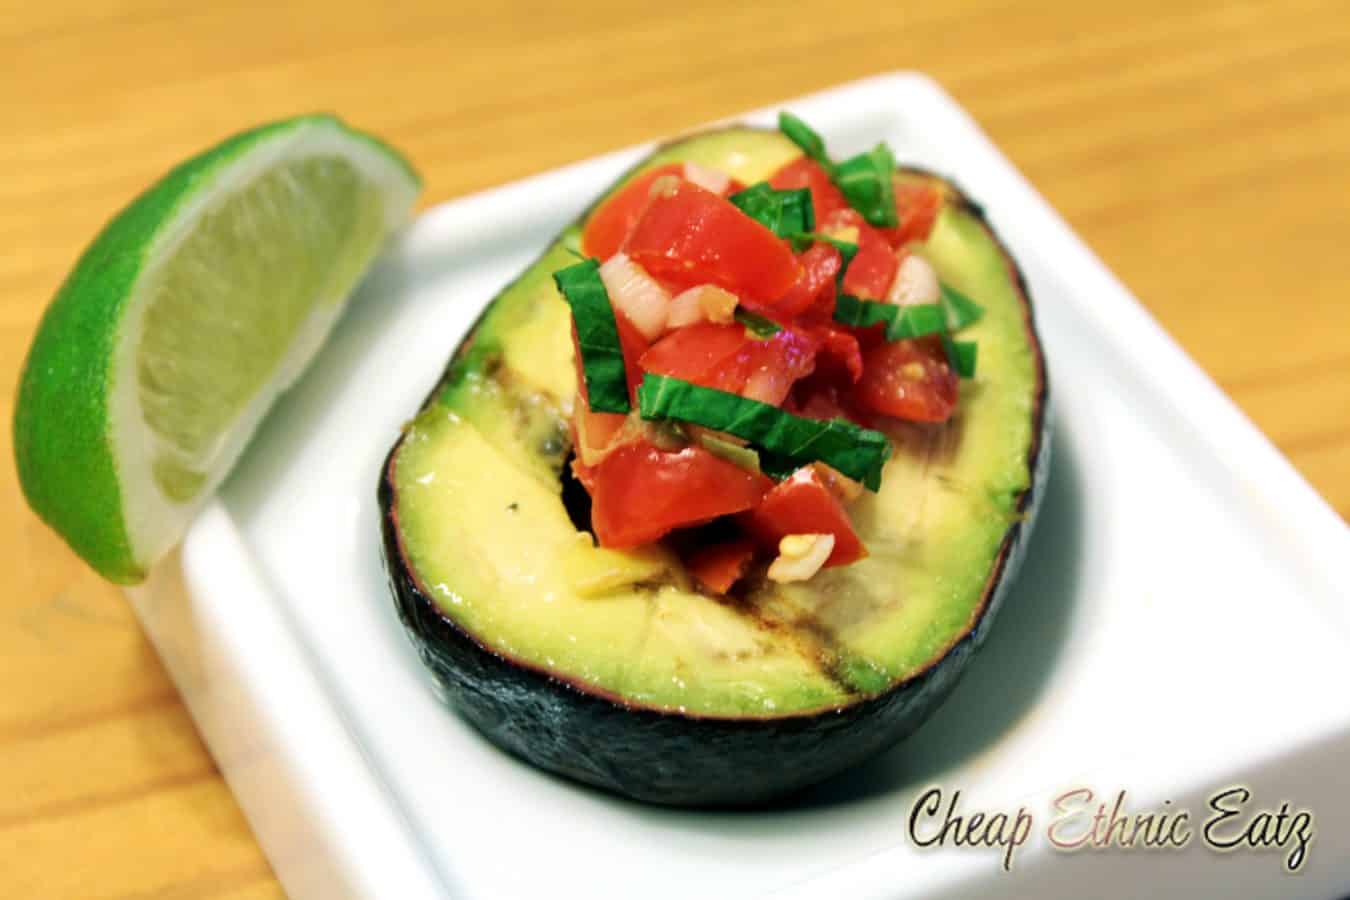 Grilled Avocado Stuffed with Salsa 2